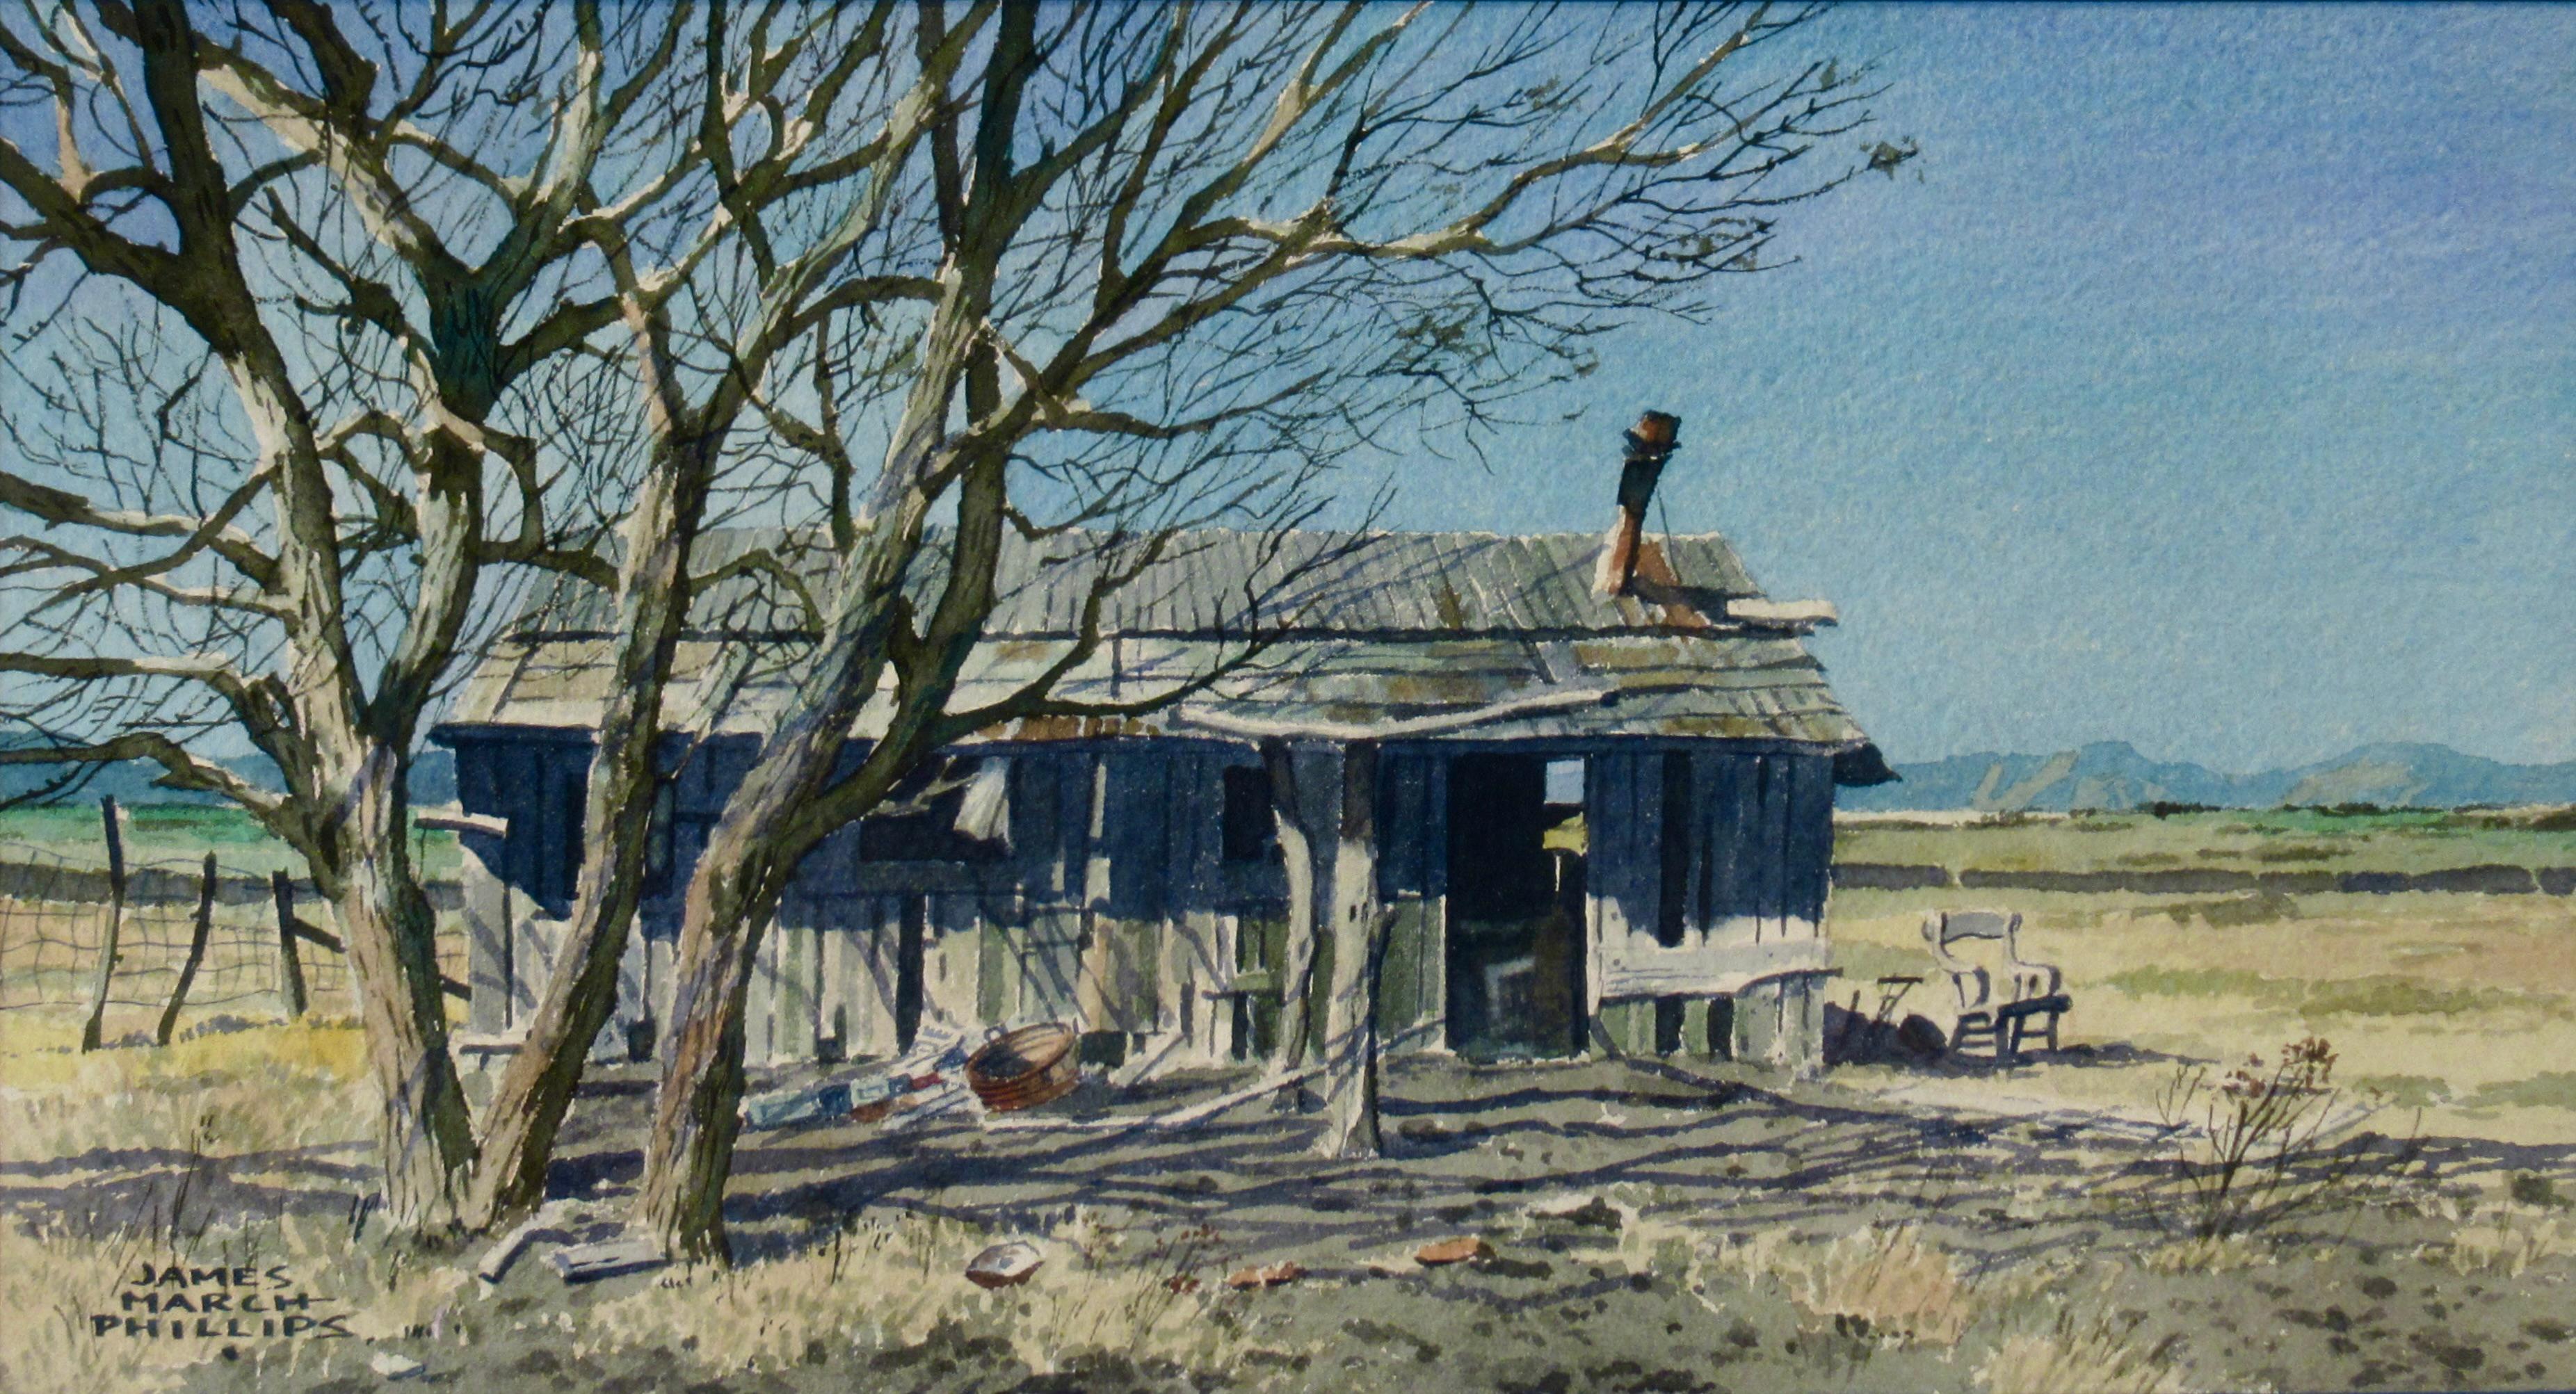 Forgotten Ranch House, Arizona - Art by James March Phillips